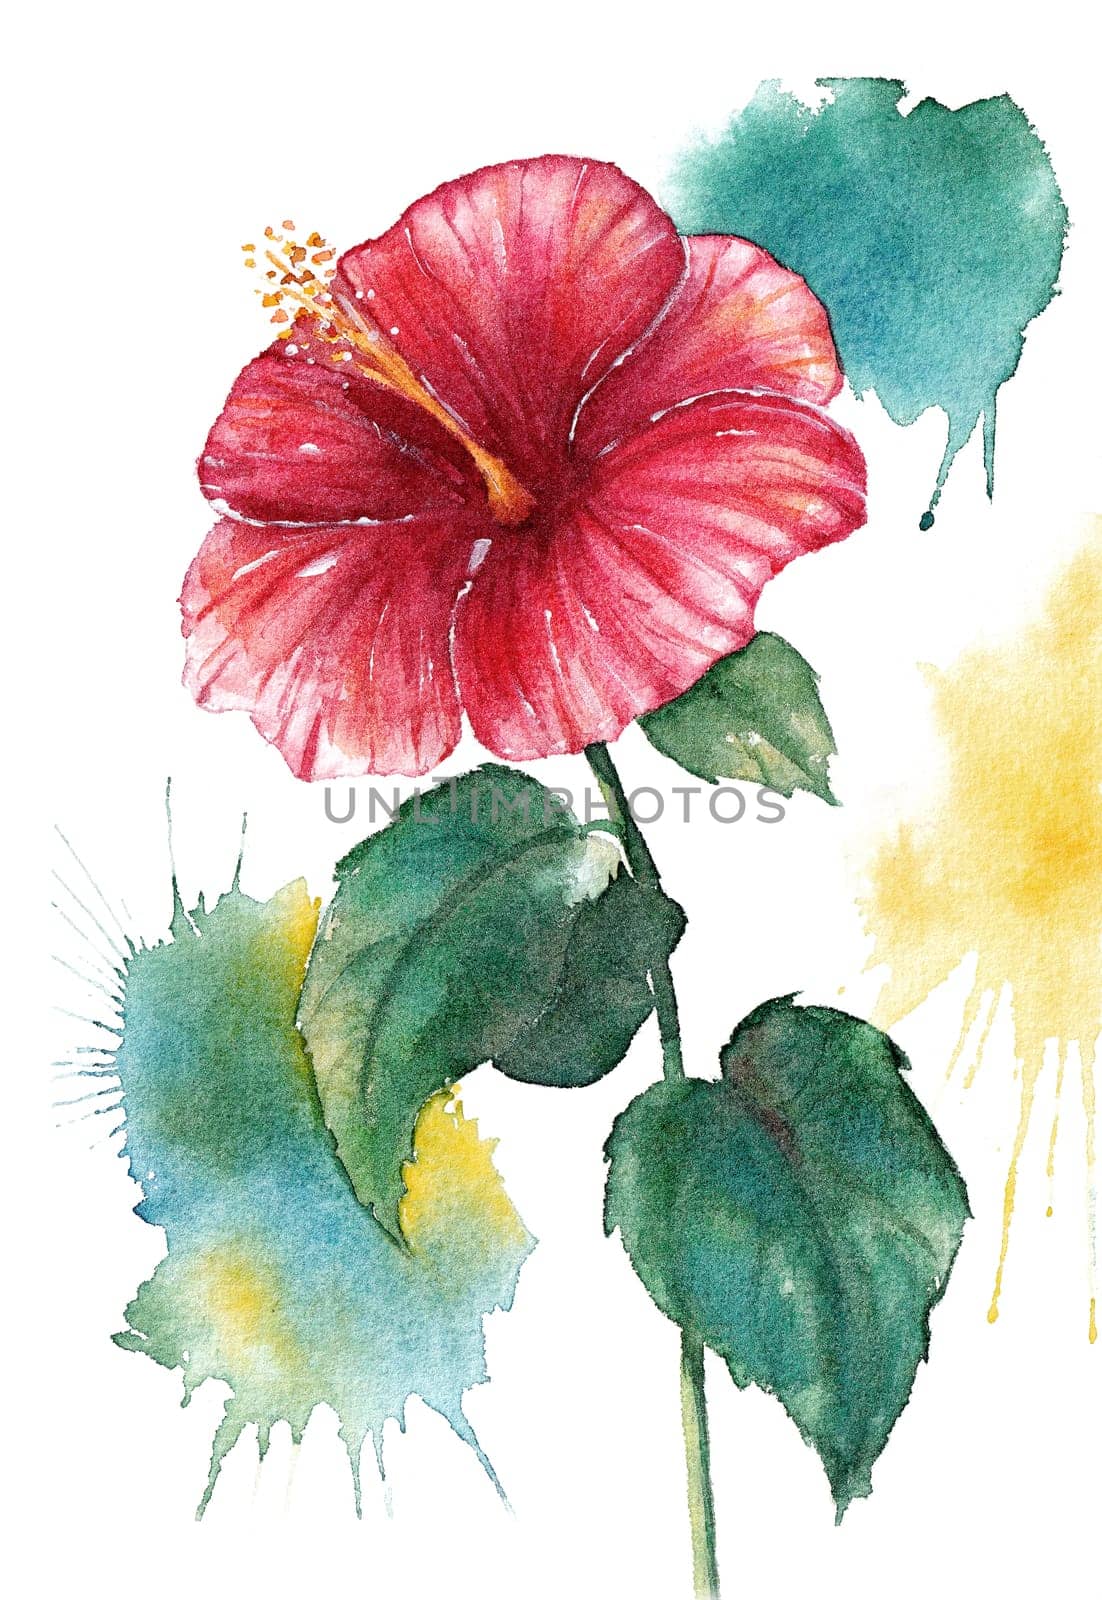 Watercolor red hibiscus flower isolated on white background with watercolor splashes by Desperada